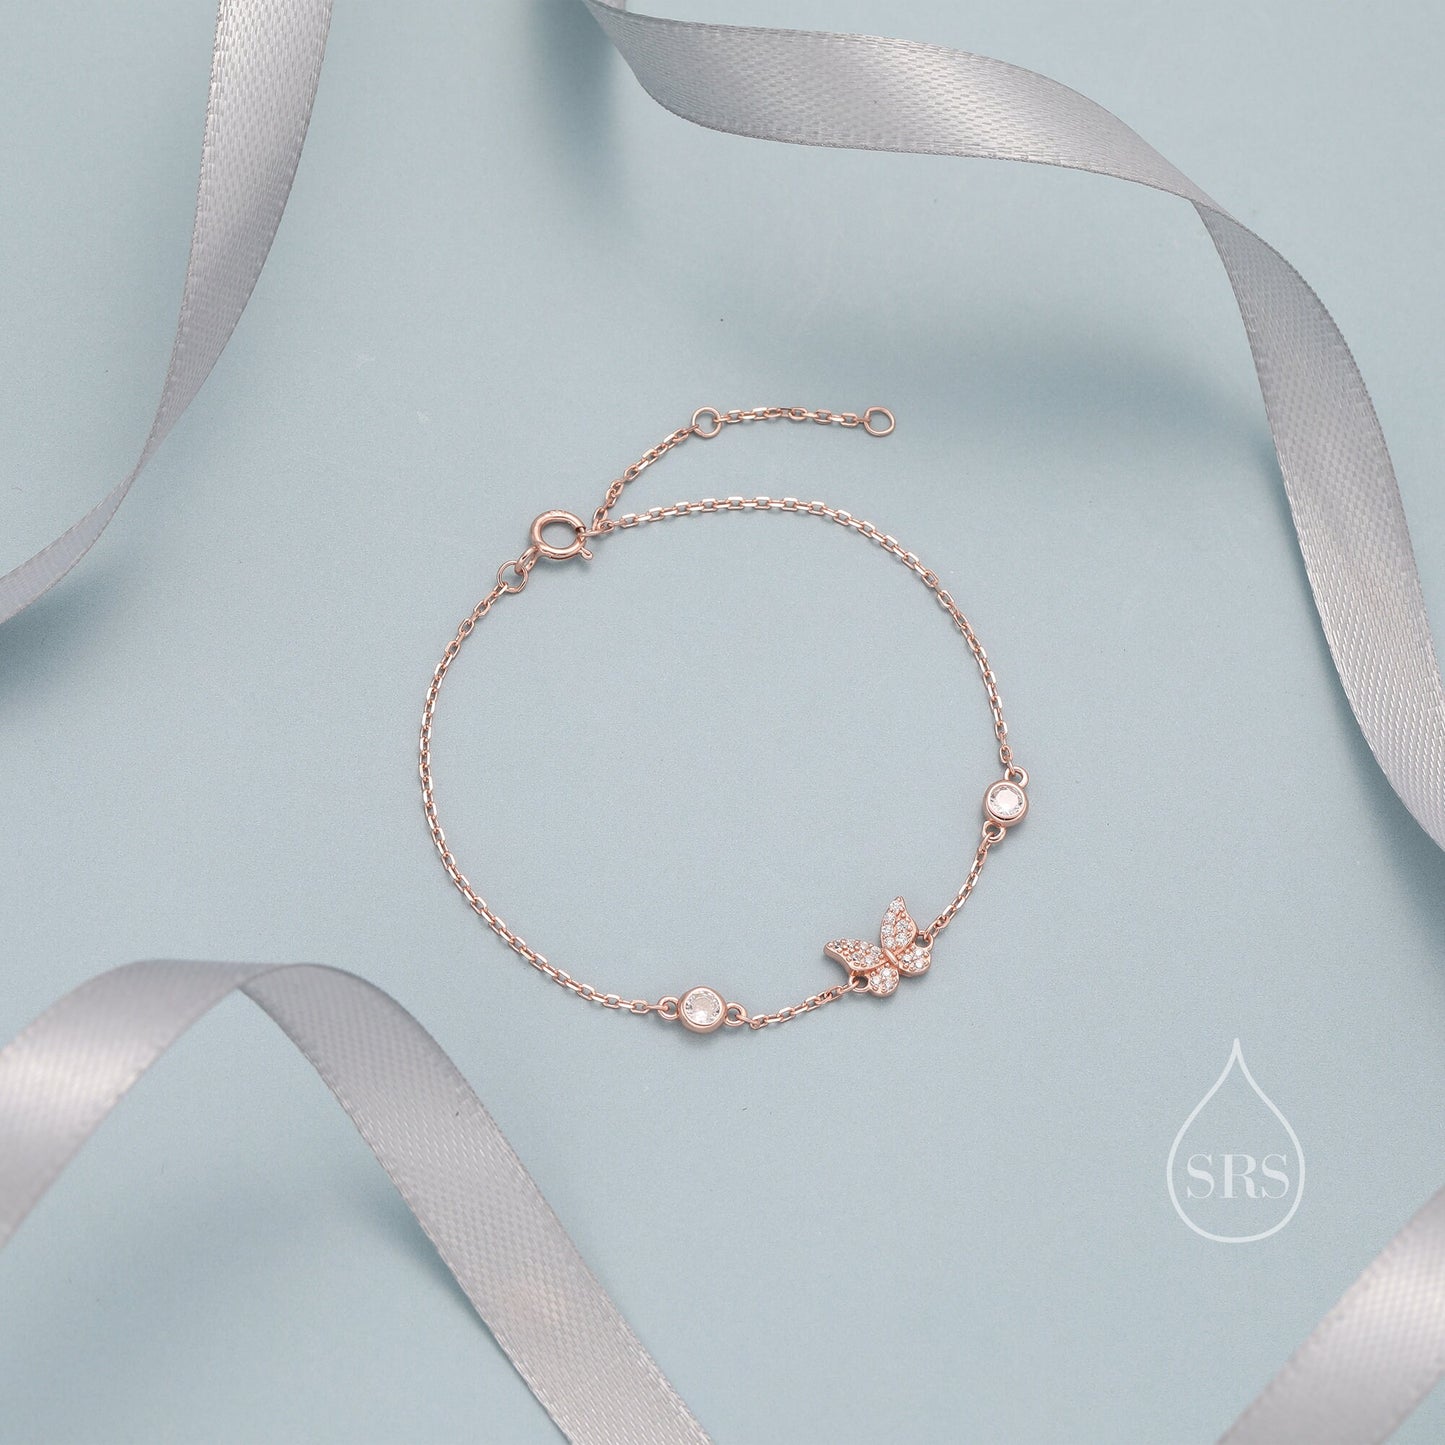 CZ and Crystal Butterfly Floating Bracelet in Sterling Silver, Silver or Gold or Rose gold, Satellite Bracelet, Solid Silver Bracelet